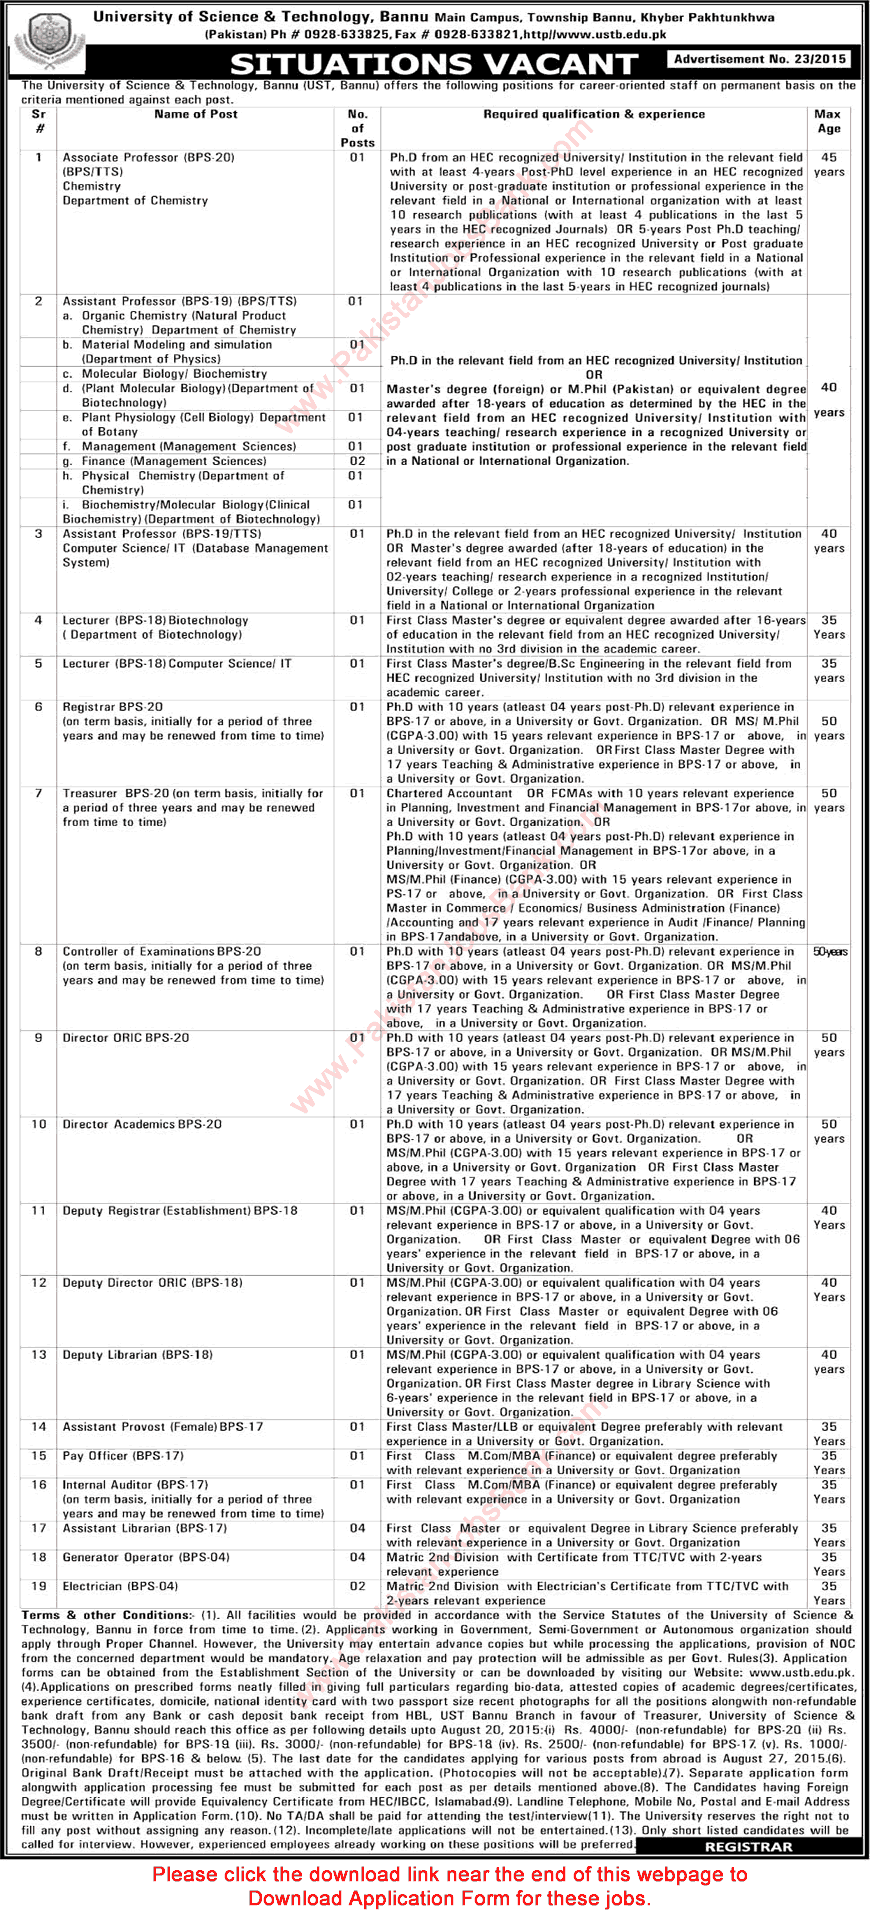 University of Science and Technology Bannu Jobs 2015 July / August Application Form Download Latest